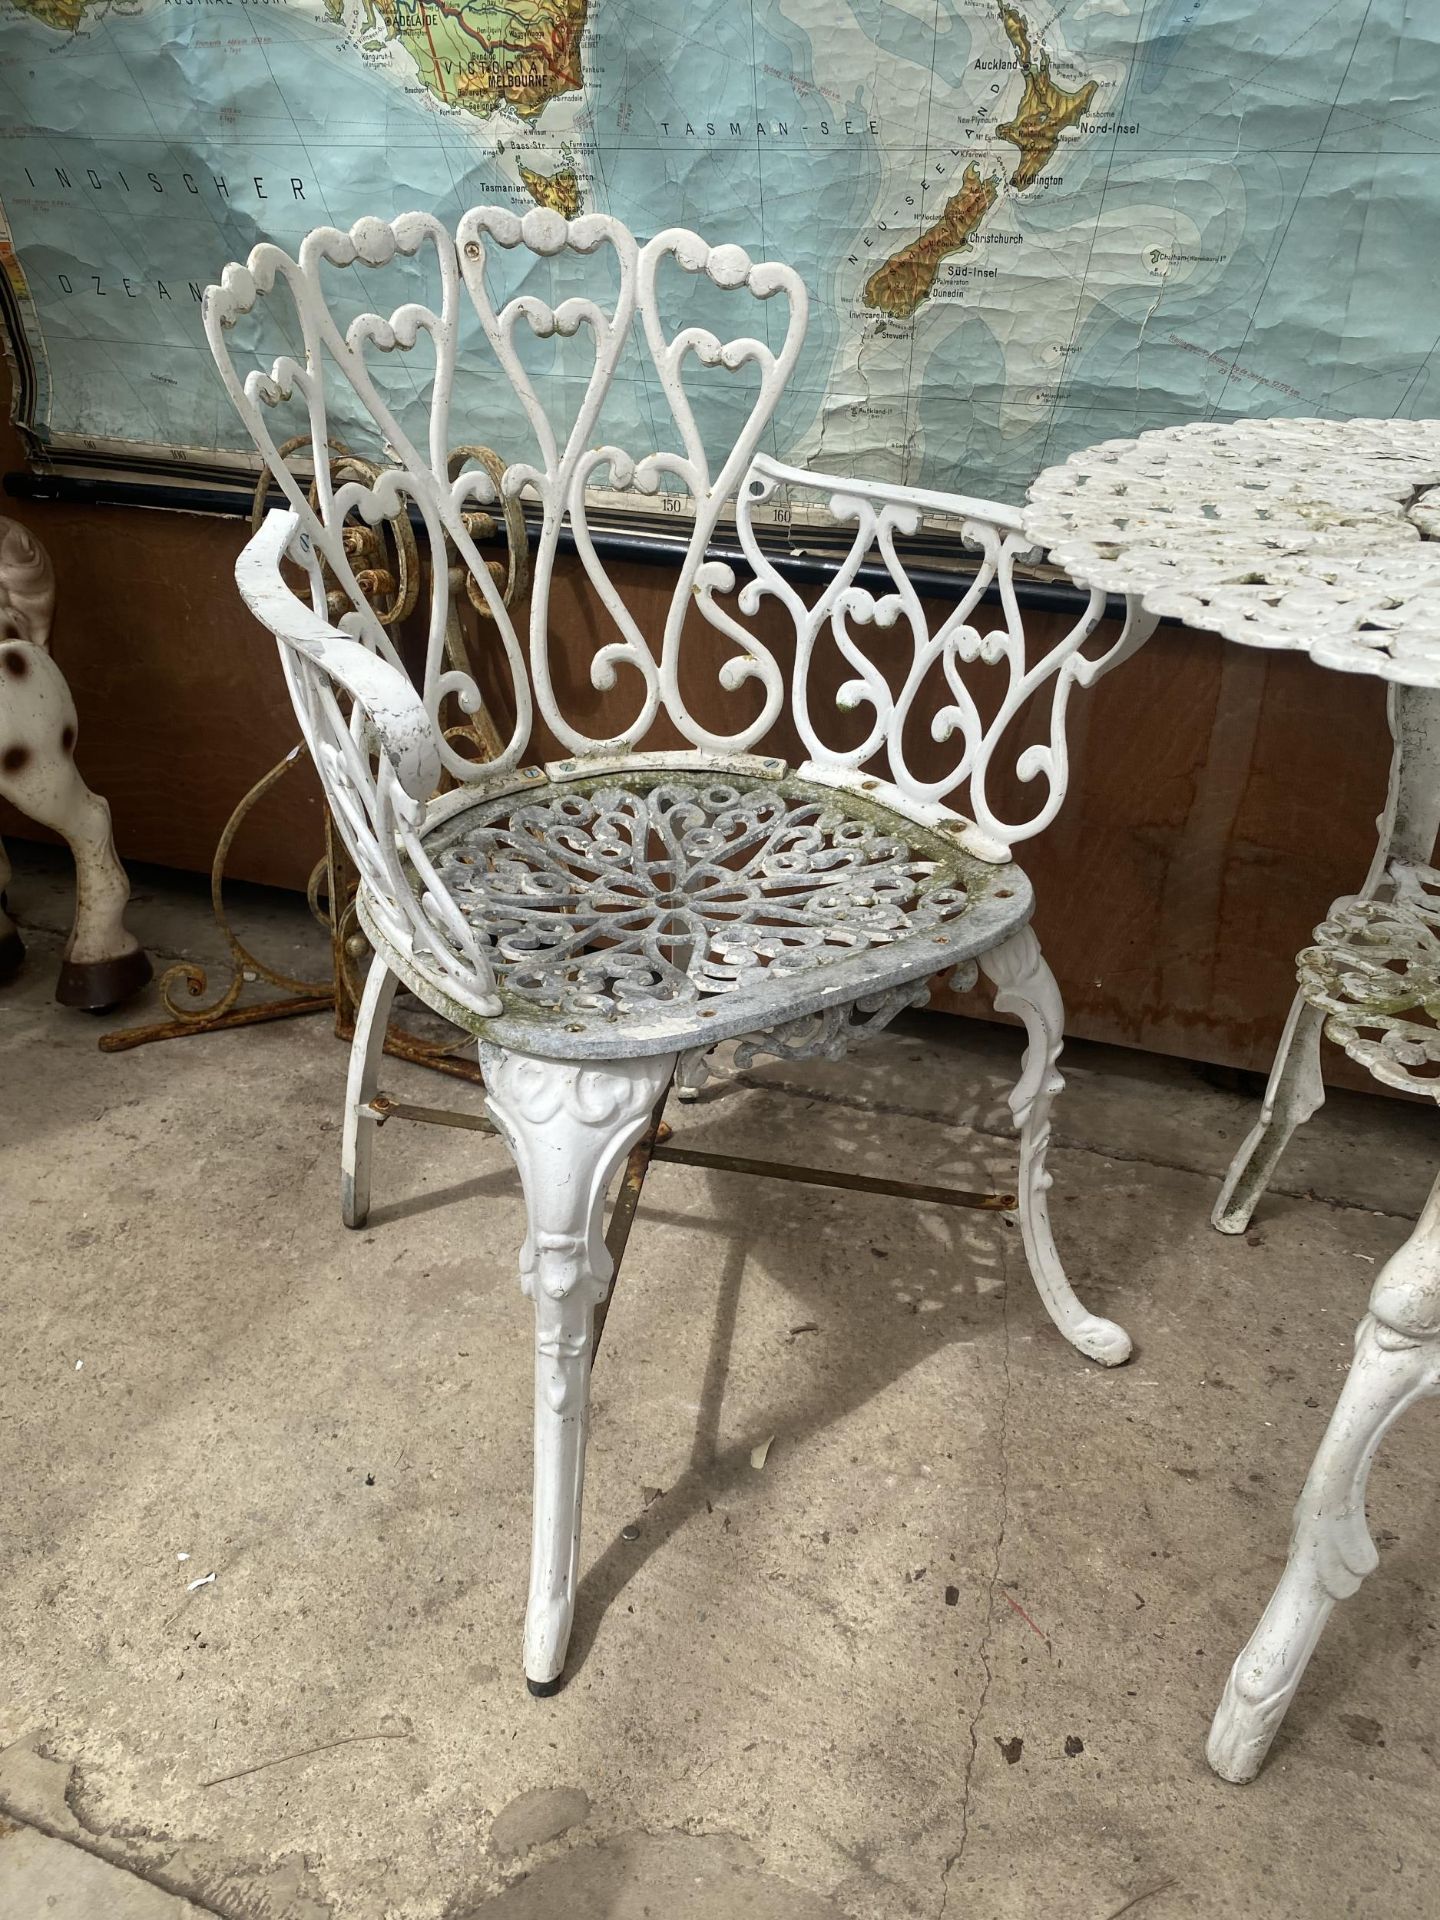 A VINTAGE CAST ALLOY GARDEN TABLE AND ARM CHAIR - Image 2 of 3